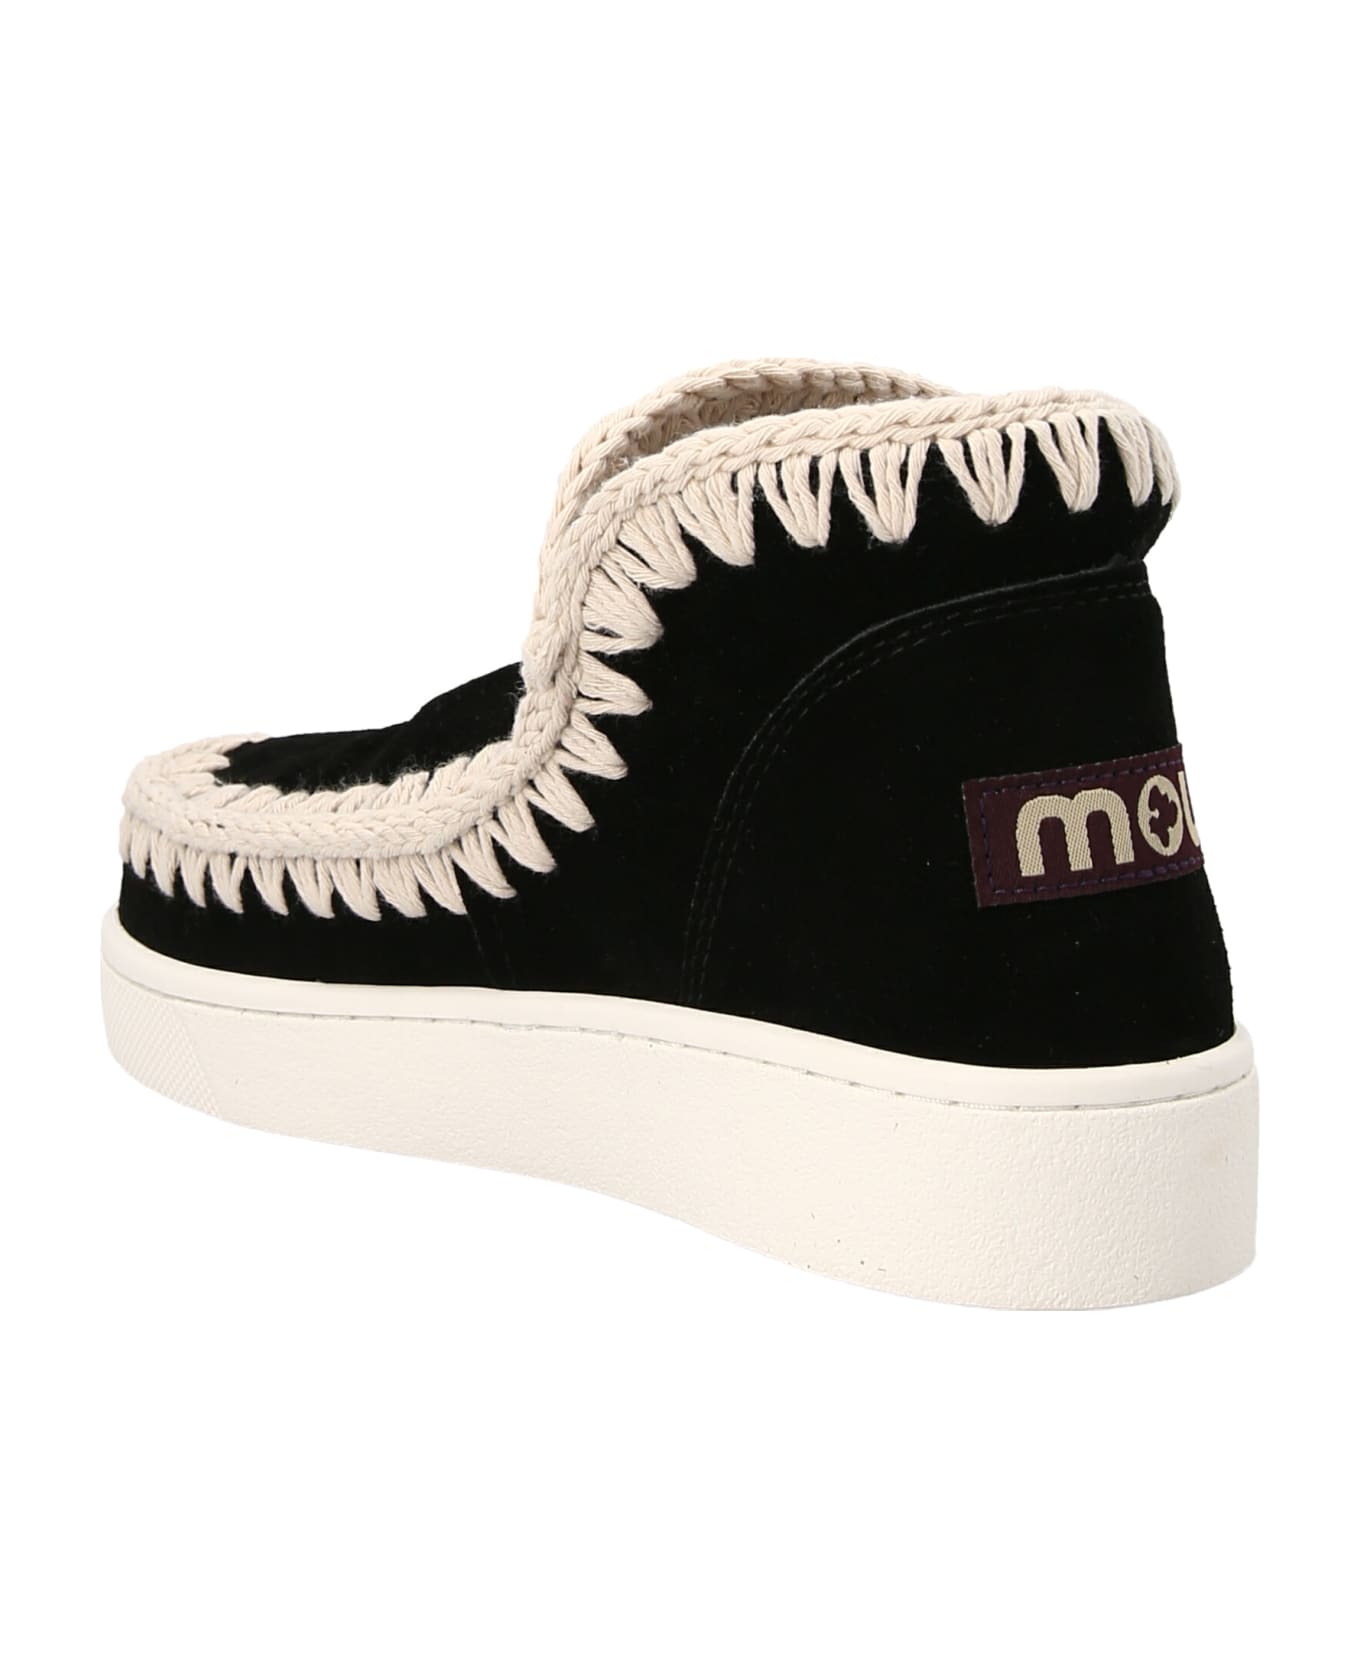 Mou 'summer Eskimo Perforated Suede' Sneakers - Bkwh Black White